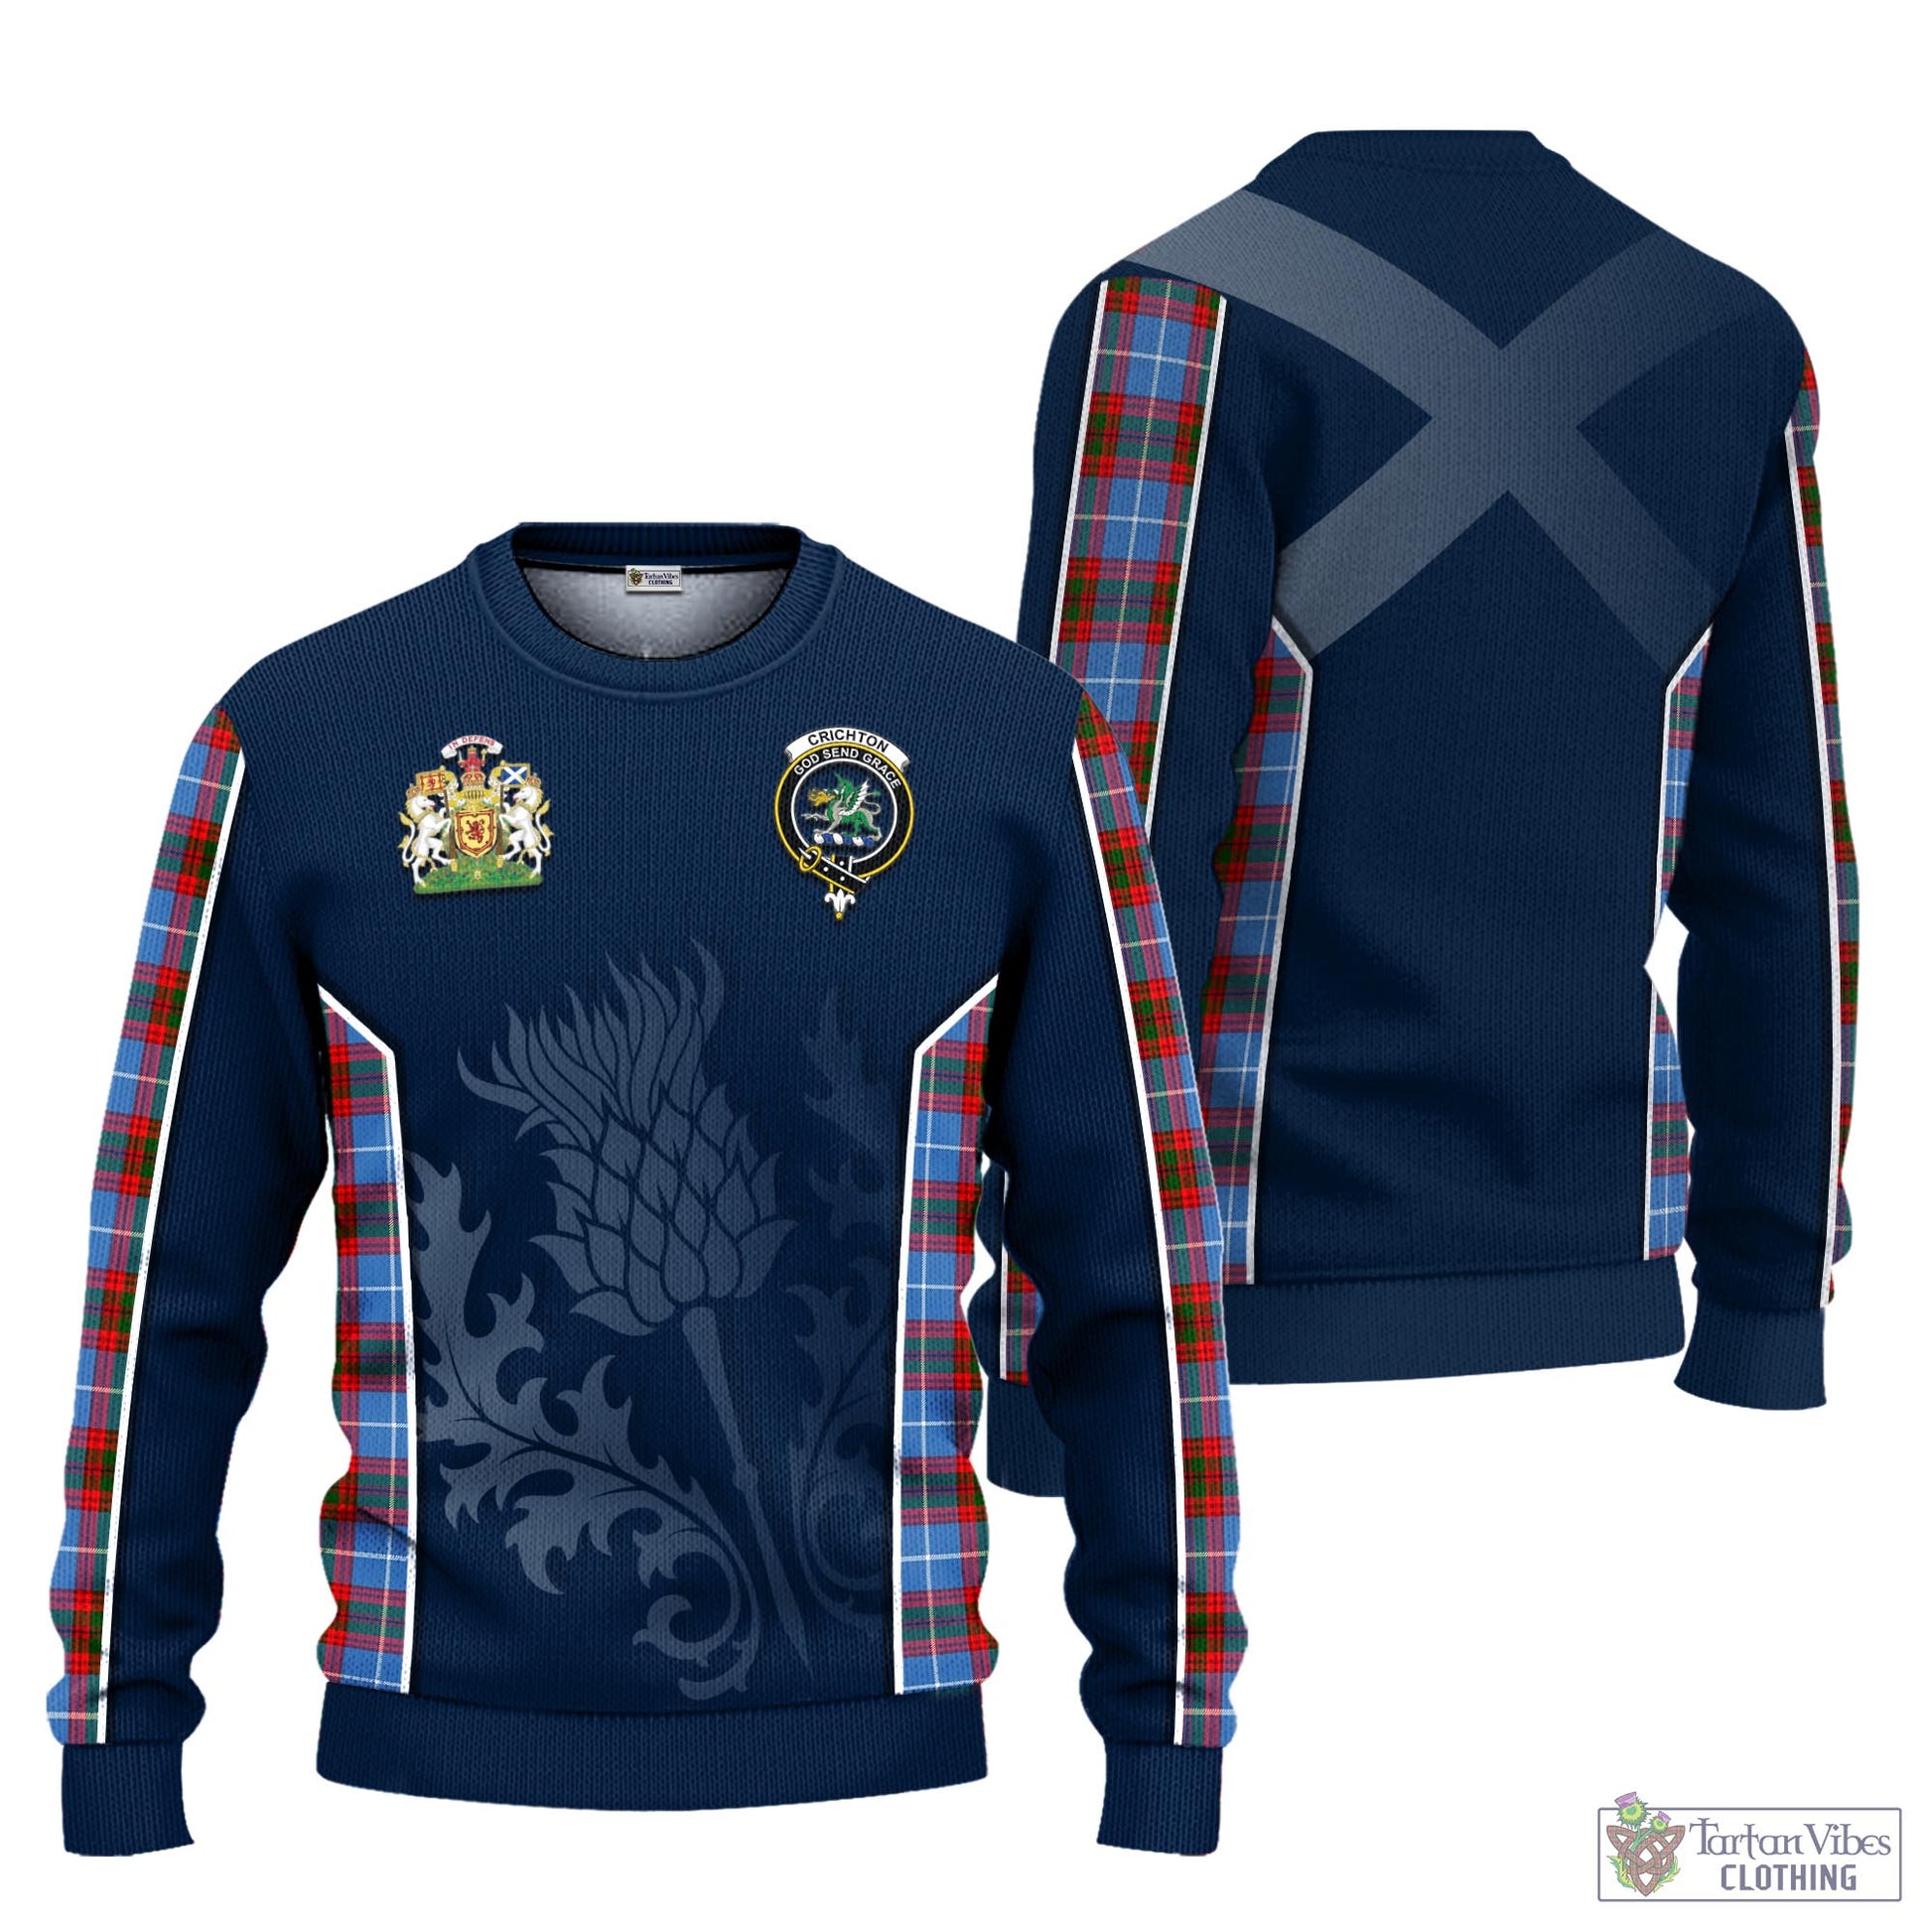 Tartan Vibes Clothing Crichton Tartan Knitted Sweatshirt with Family Crest and Scottish Thistle Vibes Sport Style